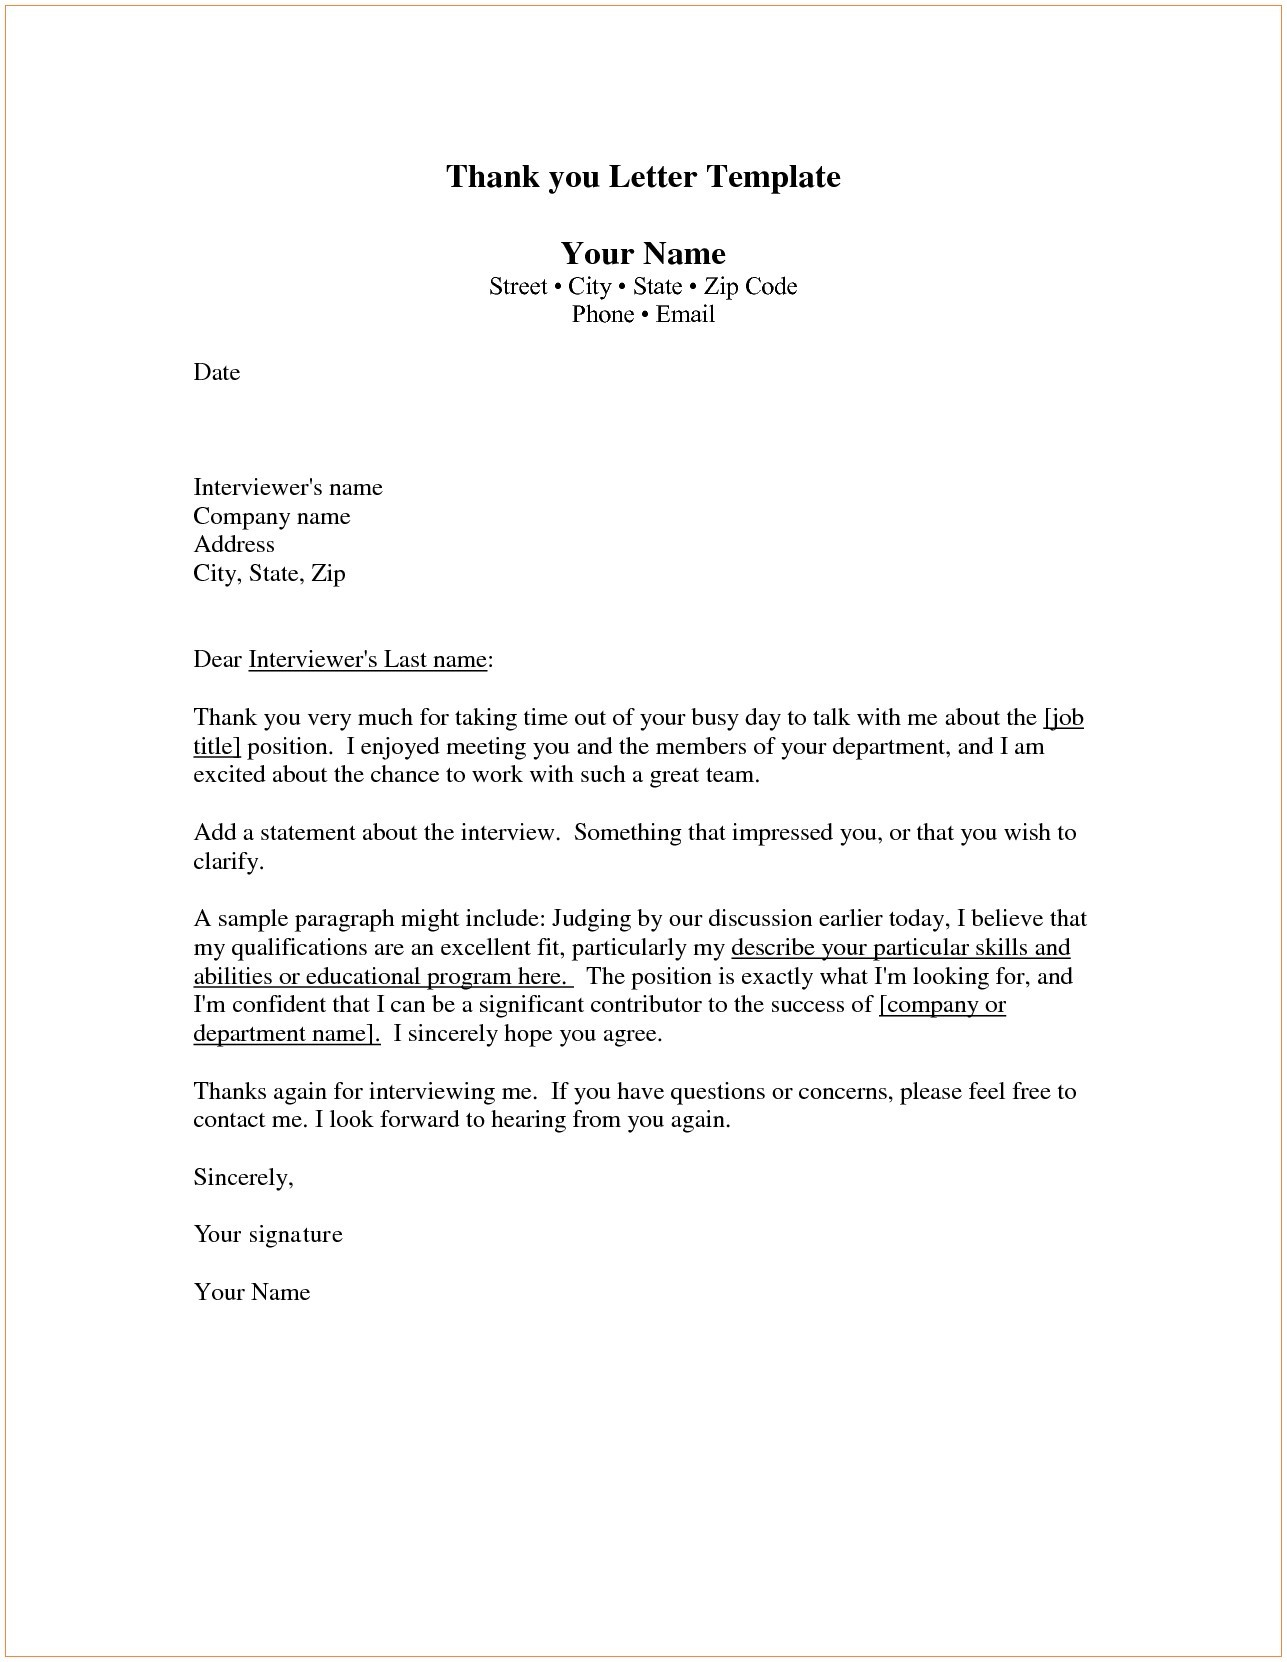 Thank You Letter Template - Thank You for Your Business Letter Template Save Http Jobsearch